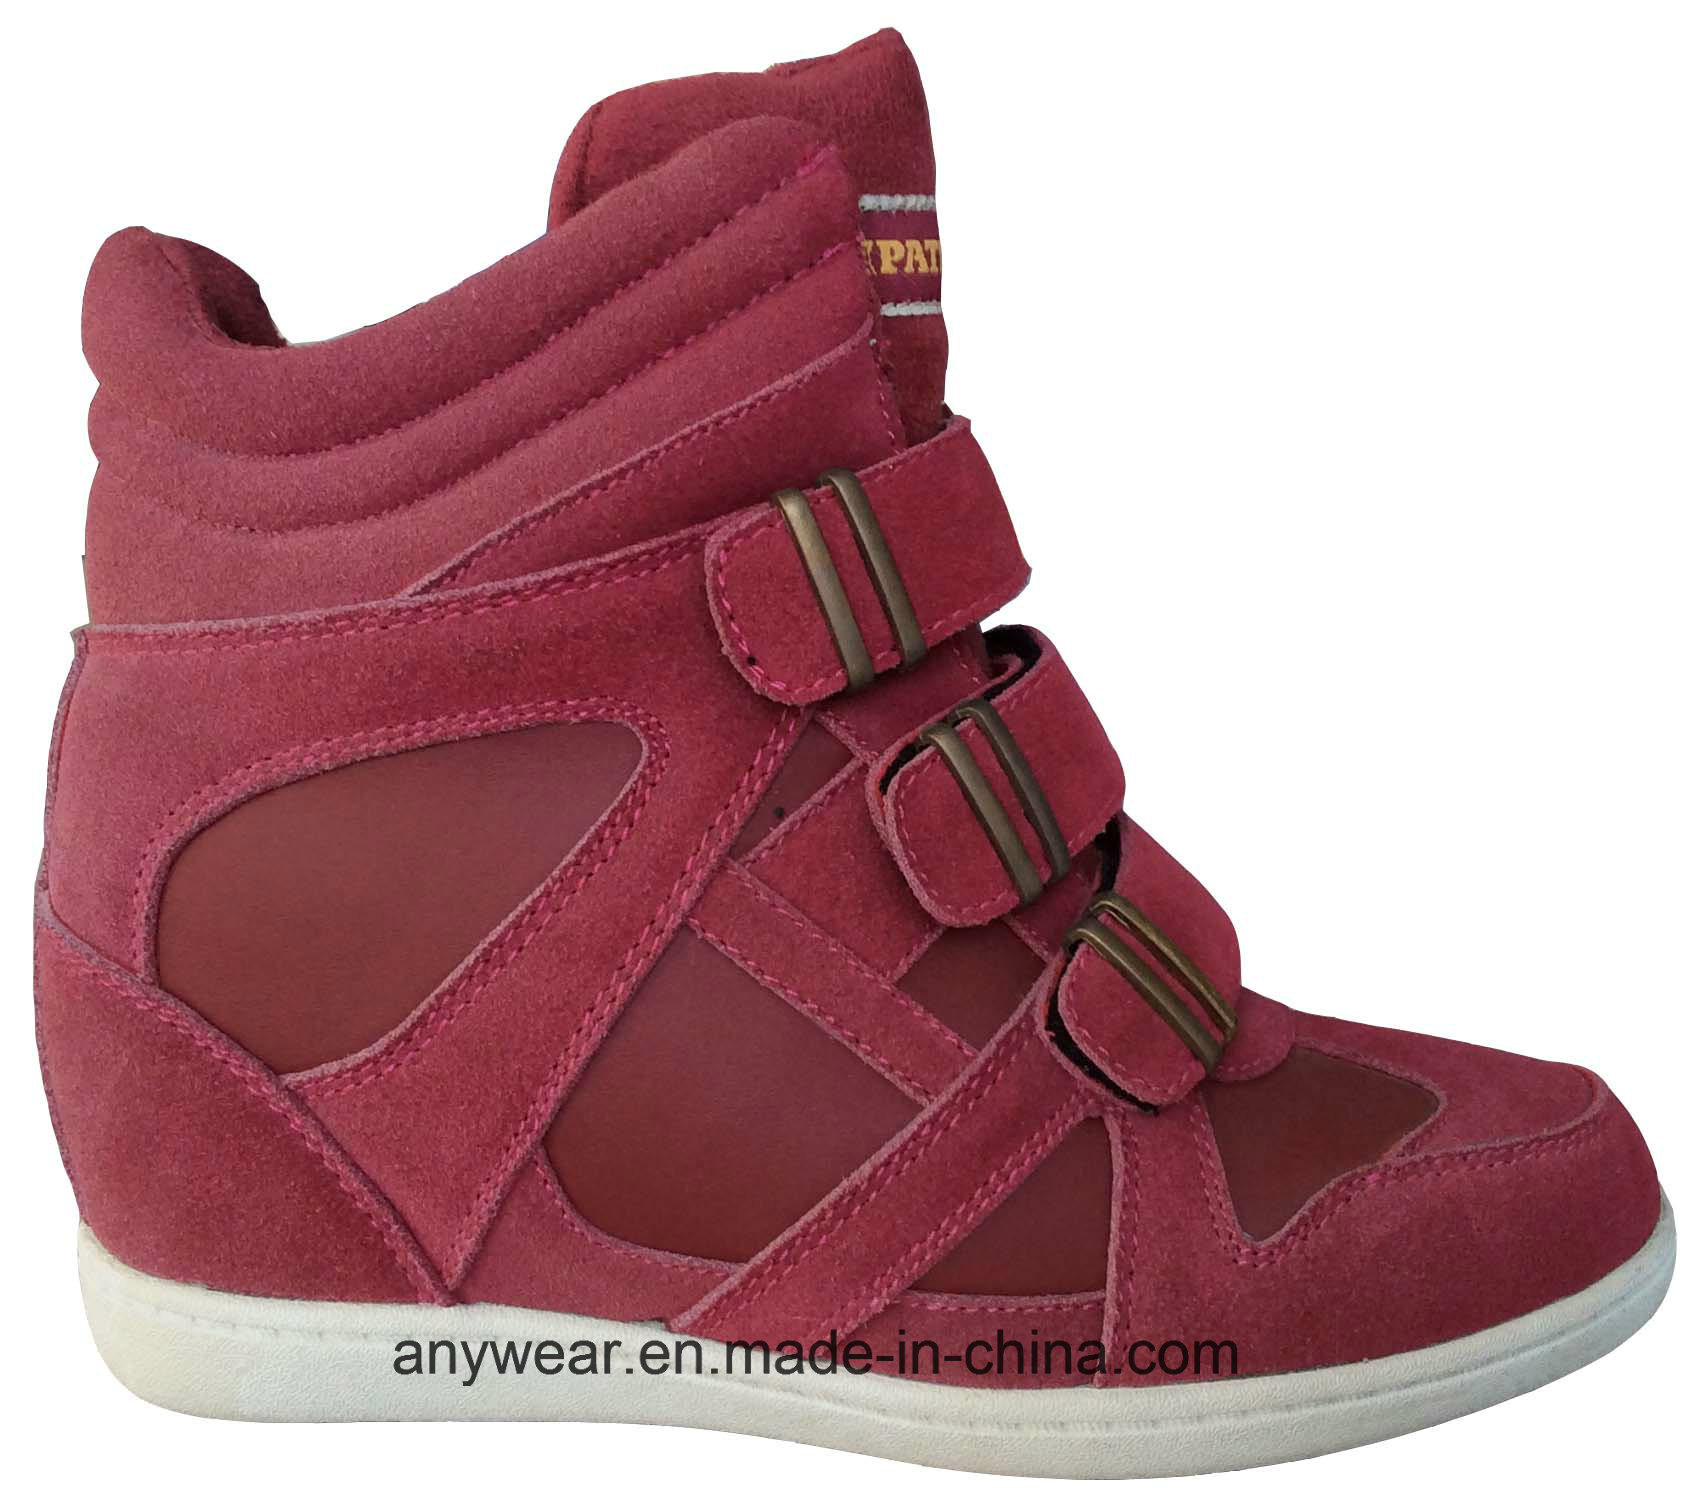 China Women Leather Fashion Comfort Boots Shoes (515-4692)